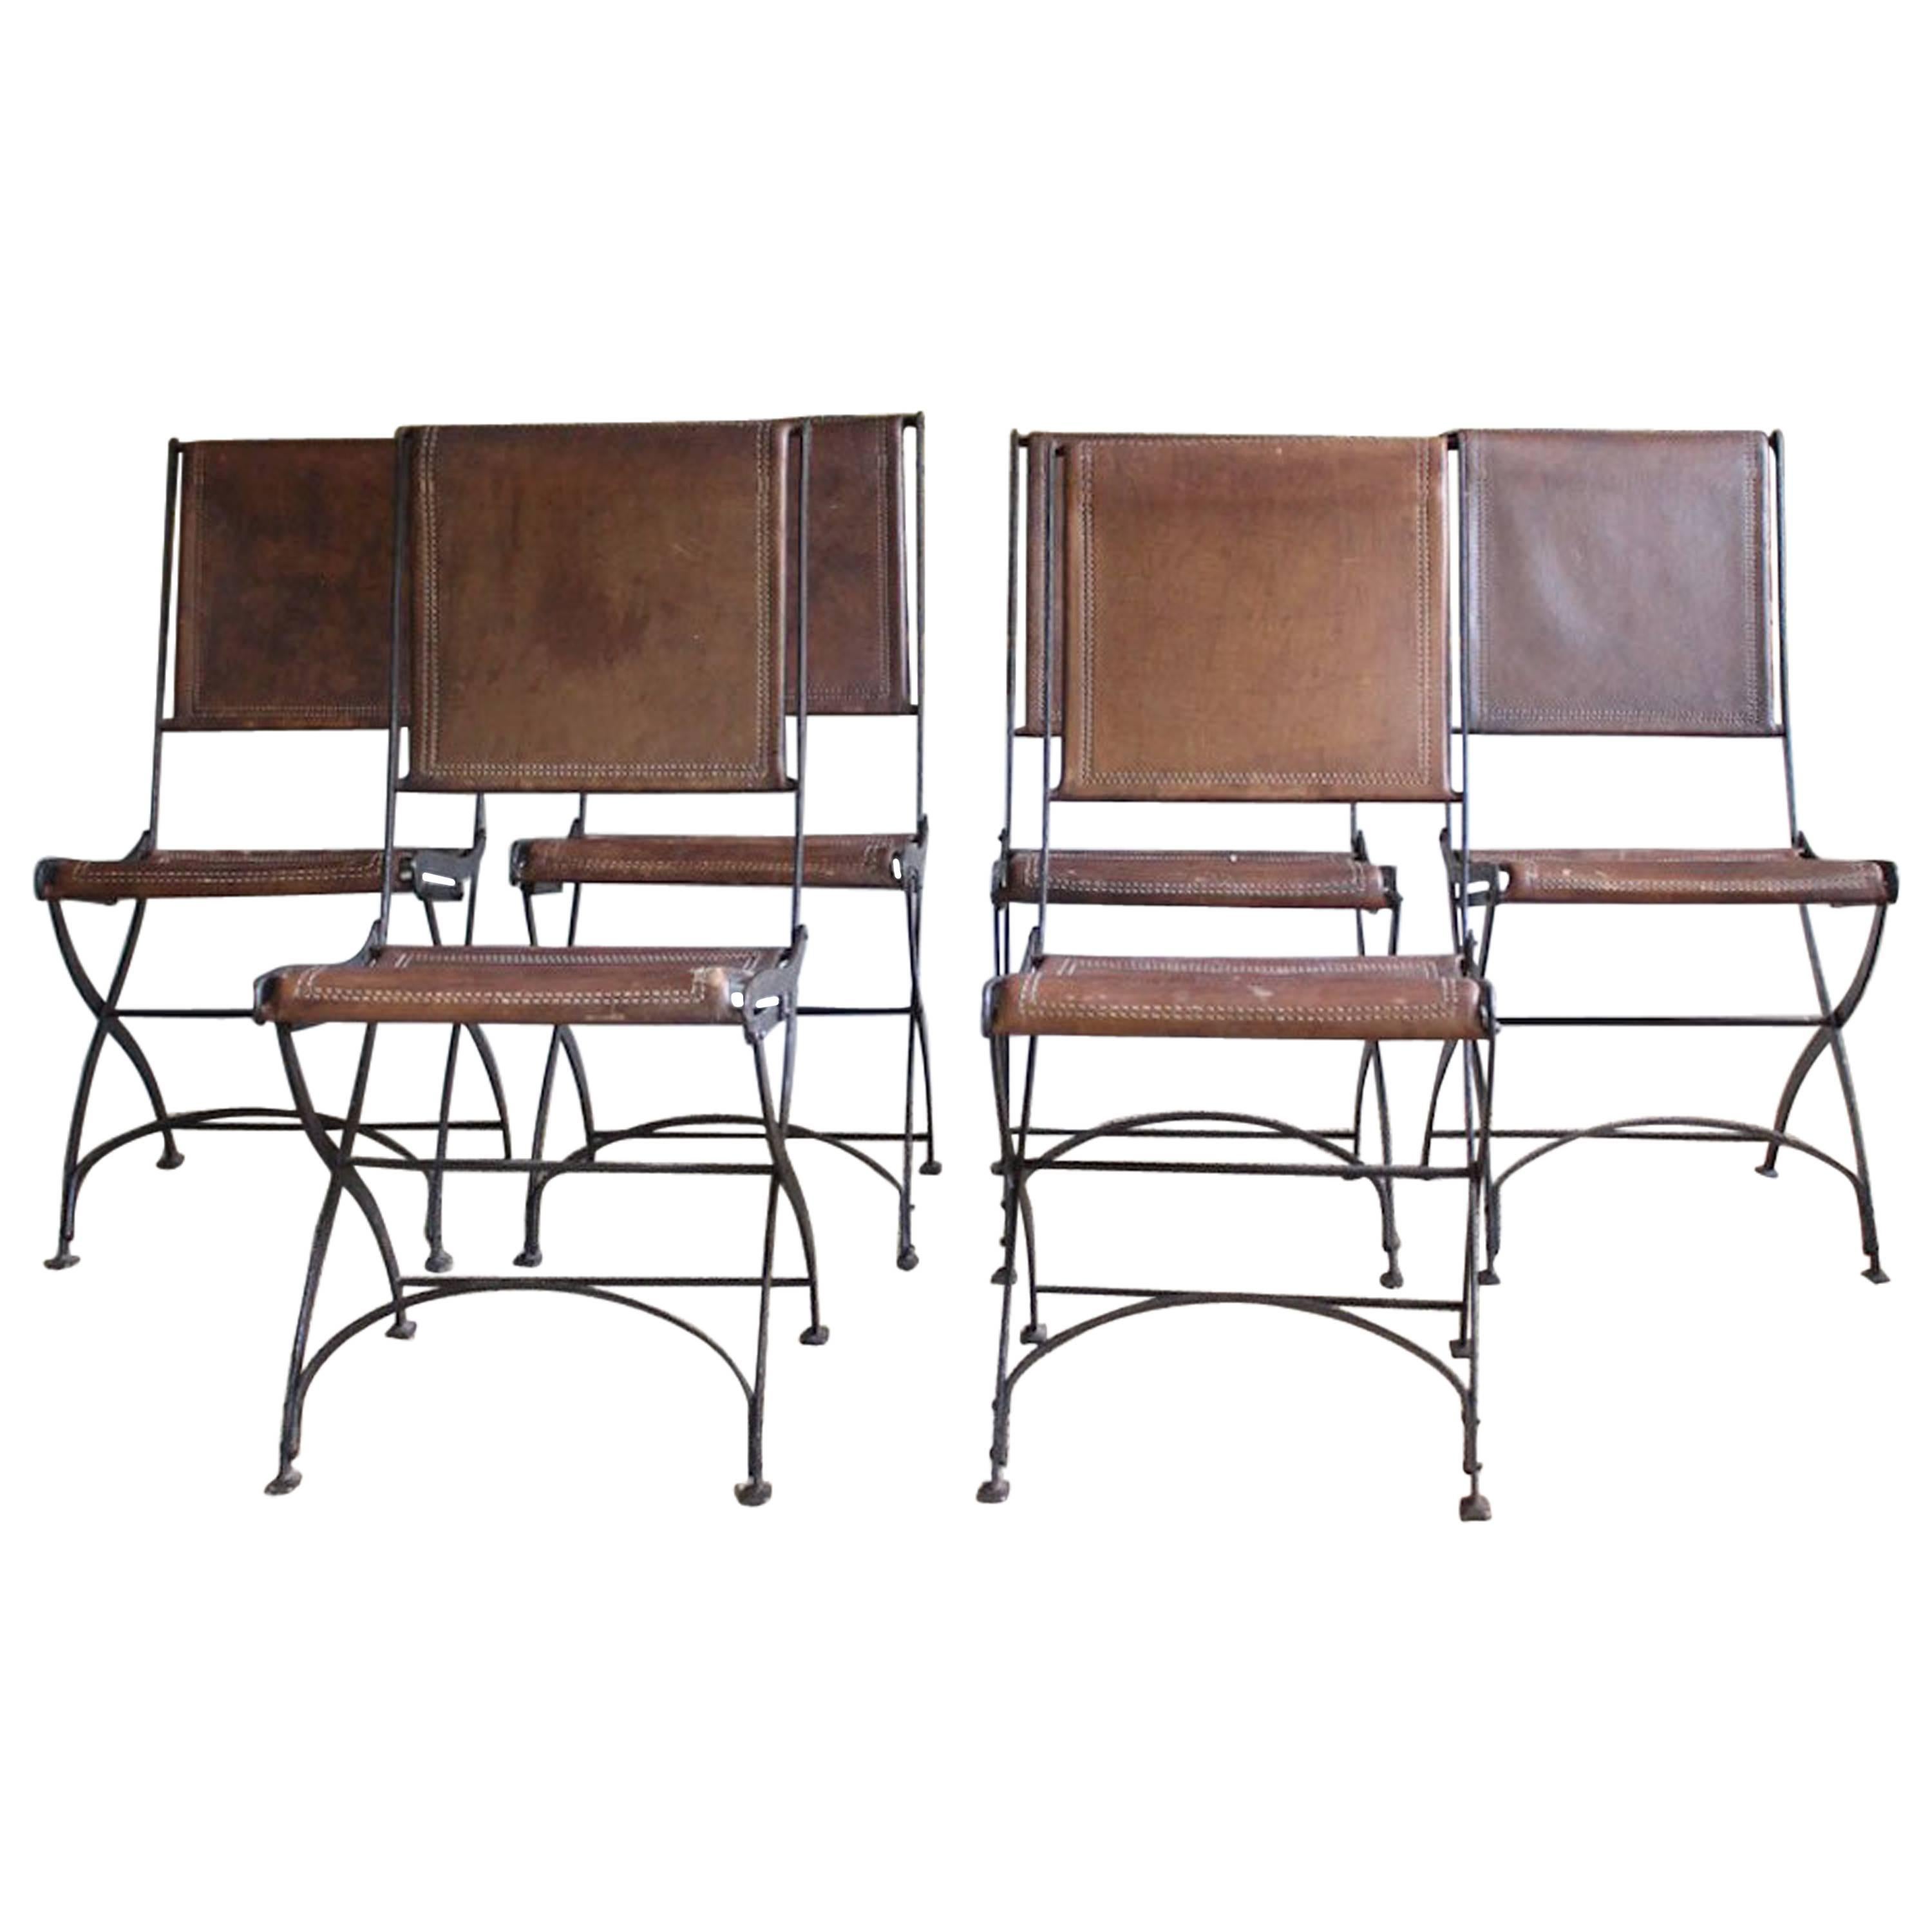 Set of Six Italian Mid-20th Century Leather and Iron Folding Chairs